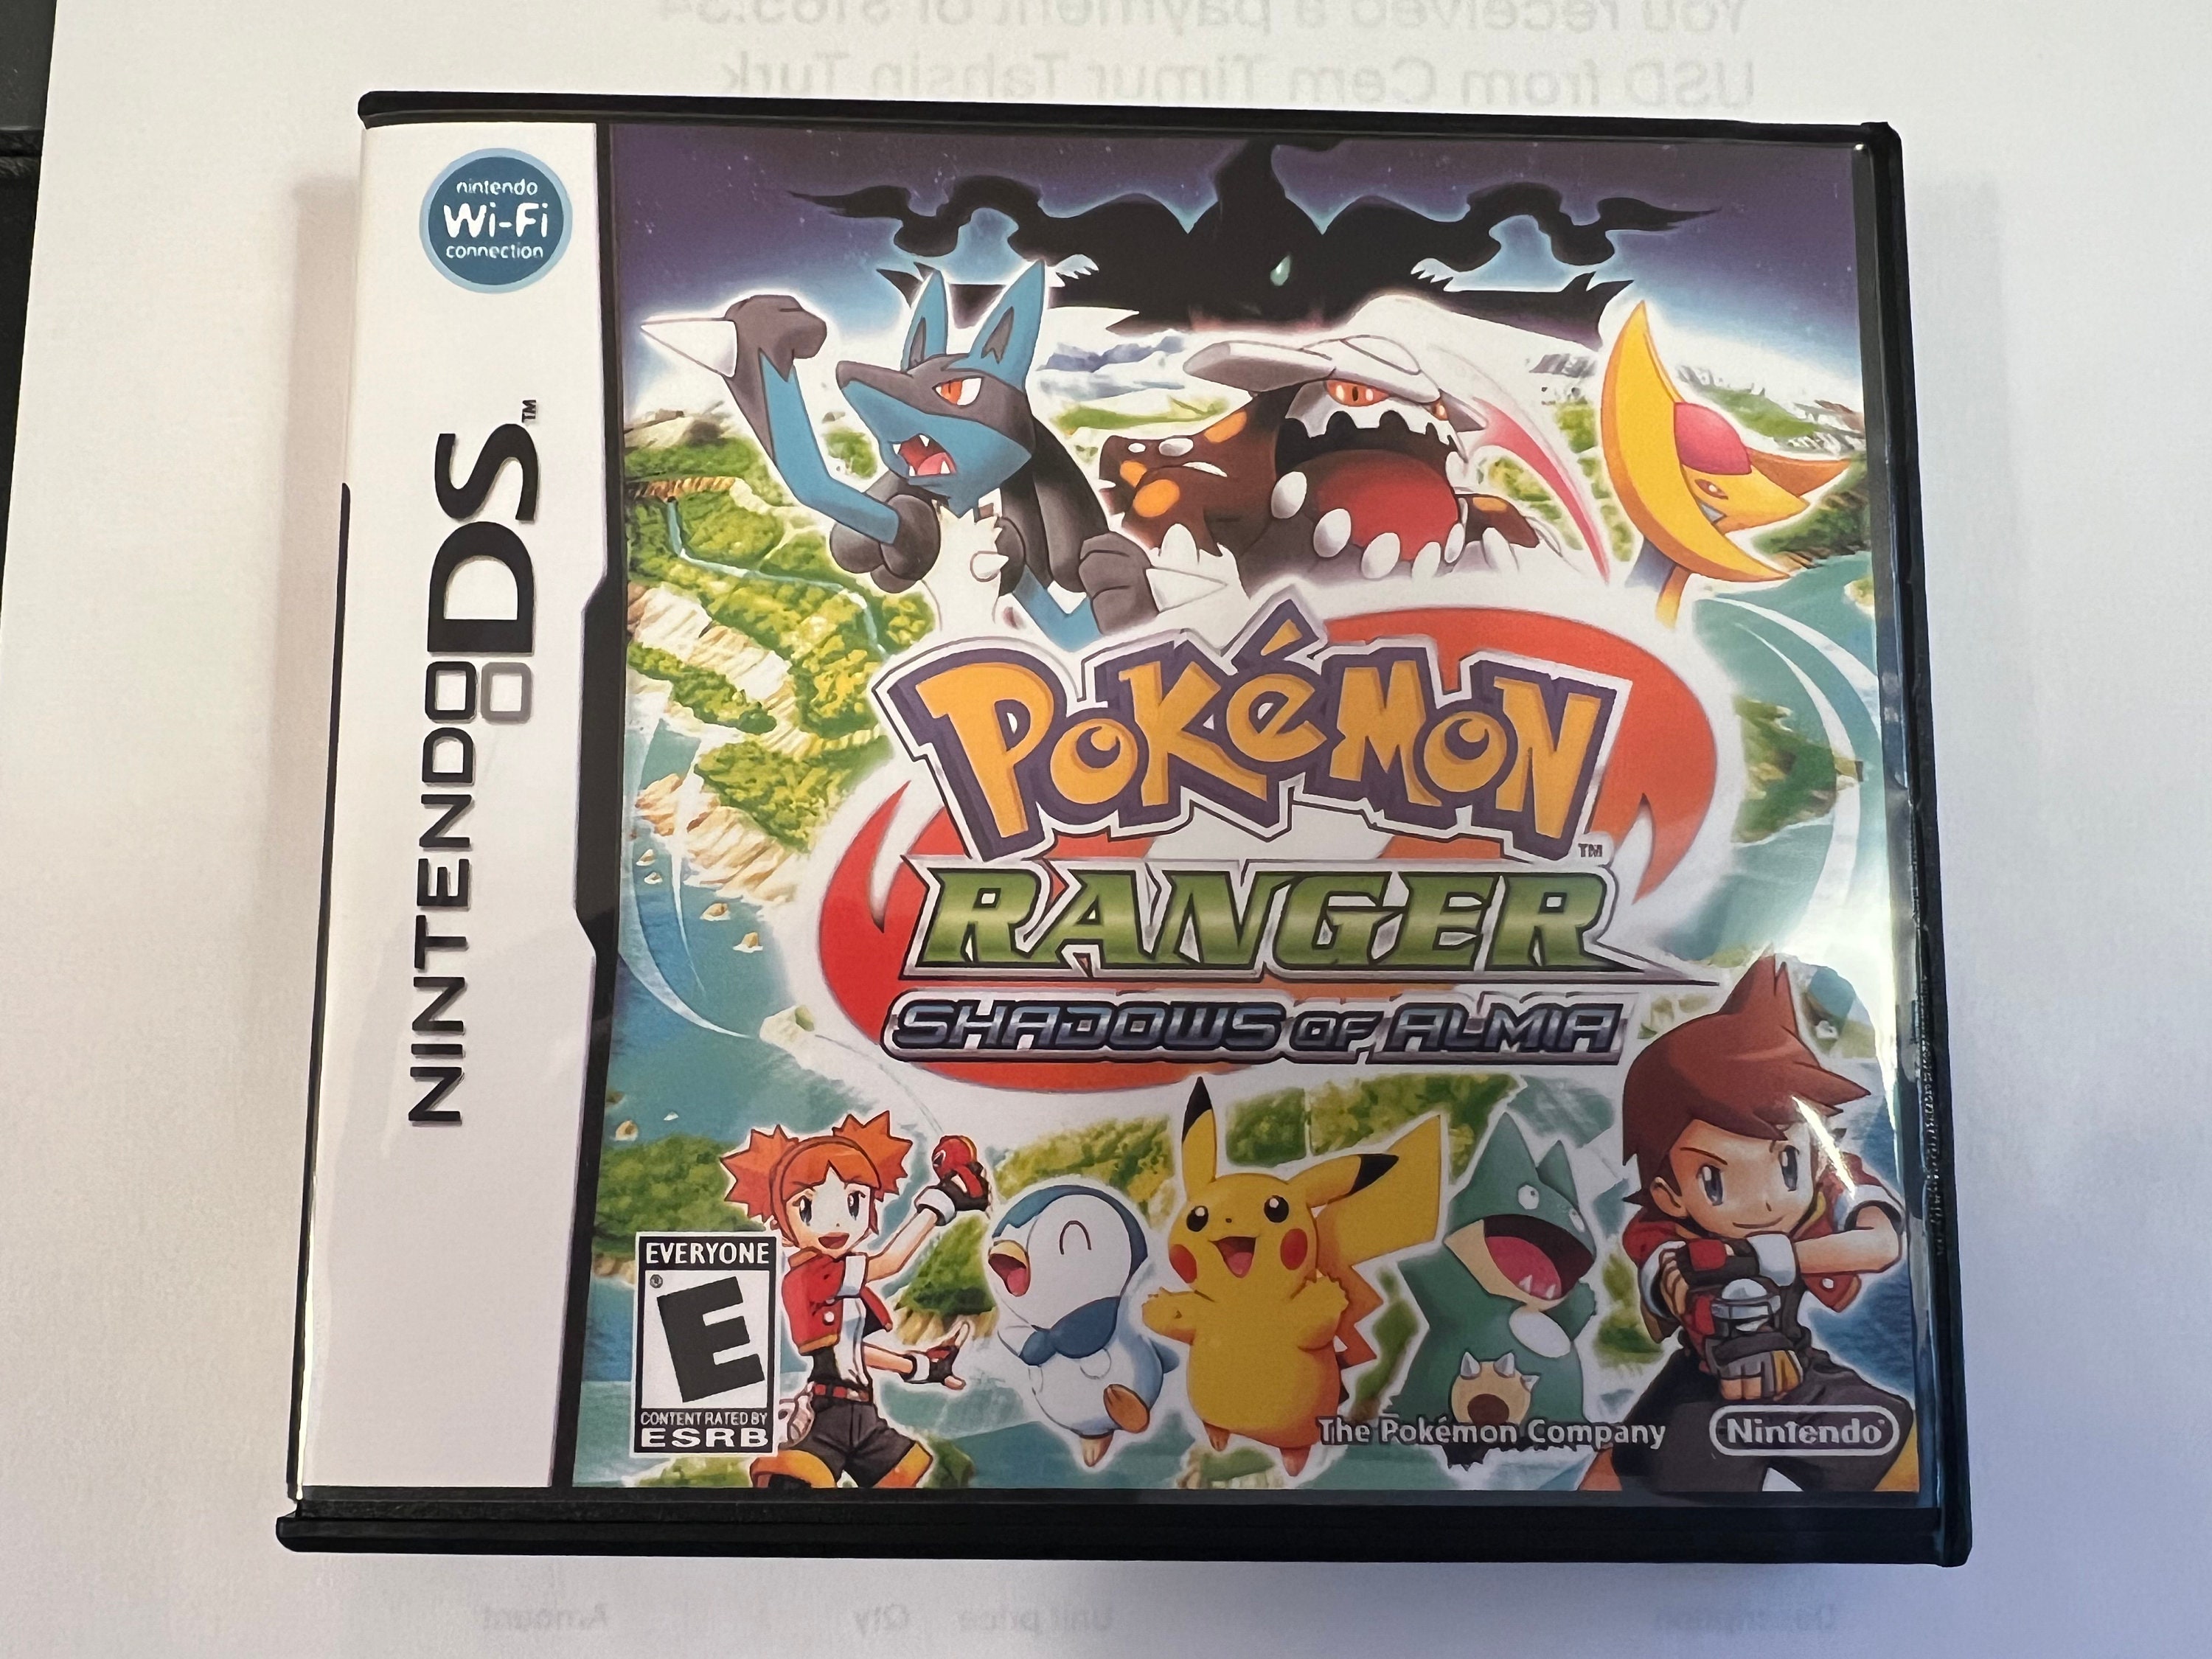 Pokemon Fire Red Version Nintendo DS Box Art Cover by ClonedX